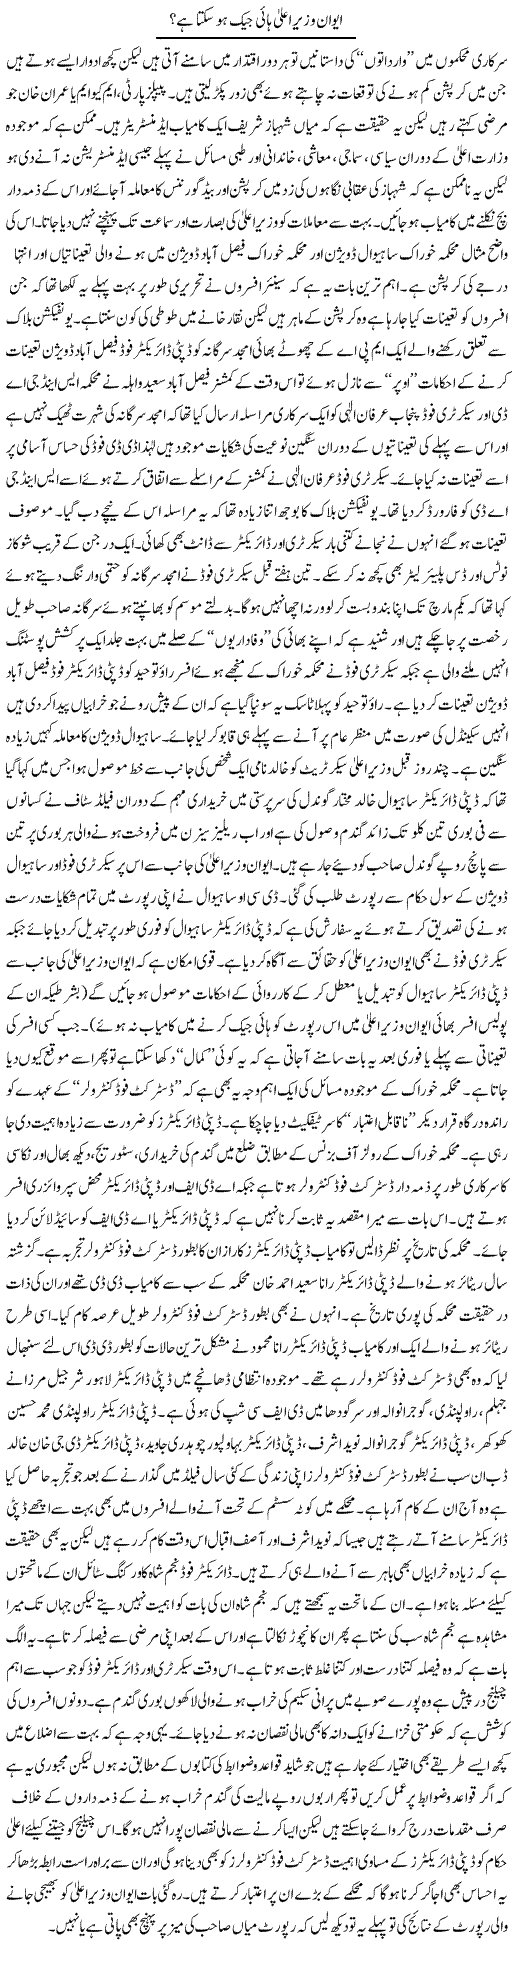 Chief Minister House Express Column Rizwan Asif 7 March 2011